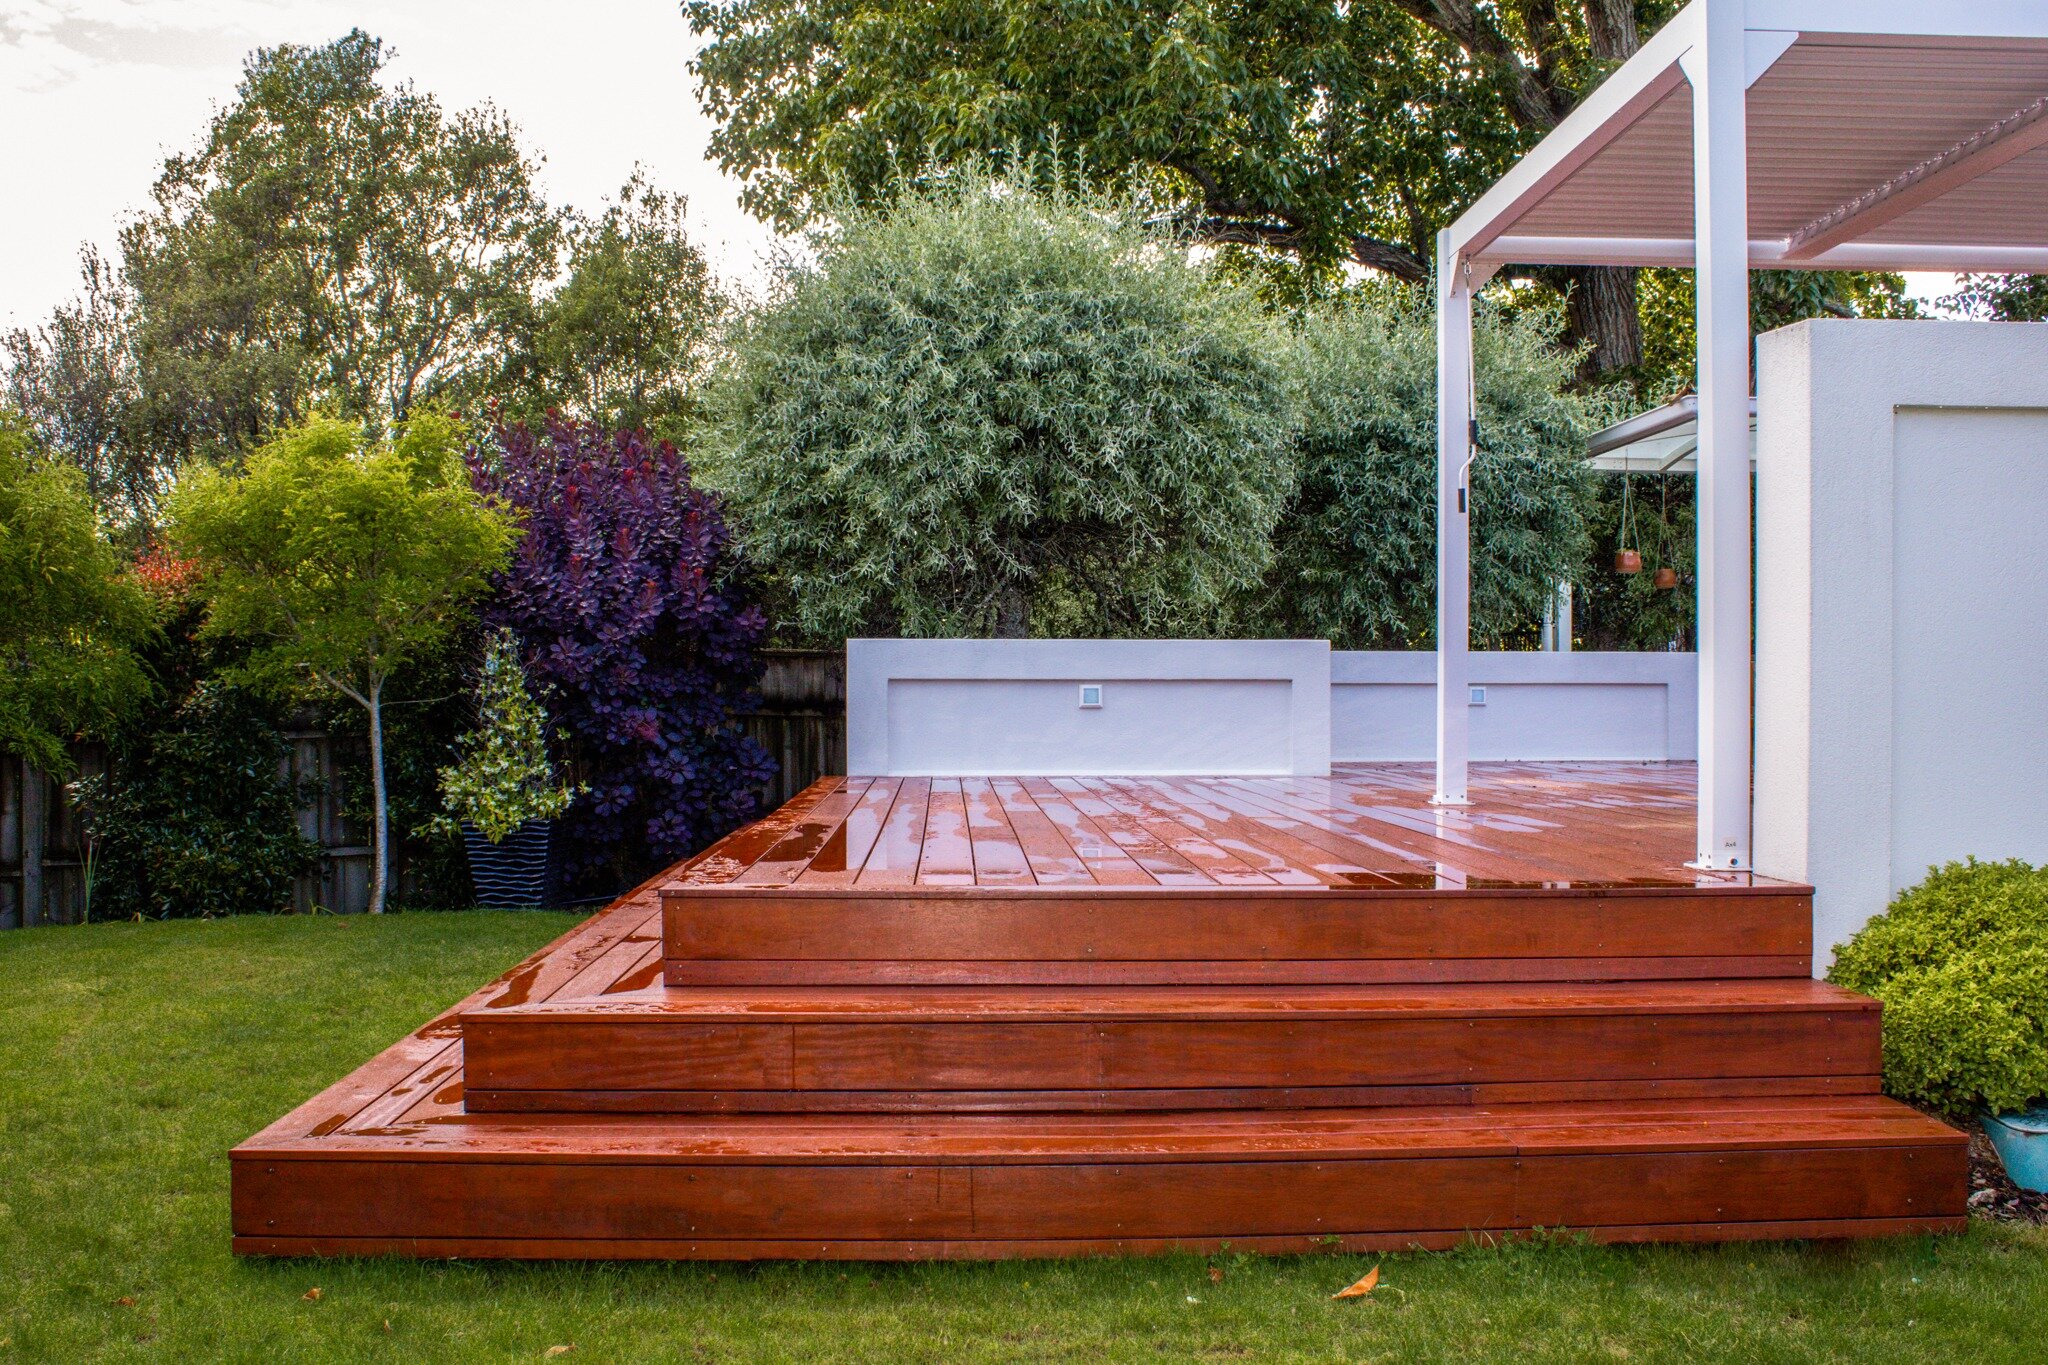 If you are thinking about revamping or extending an existing deck, now is the time to do so before the Summer rush. With small mindful changes, you can achieve a maximum impact, just like this project. 🤩